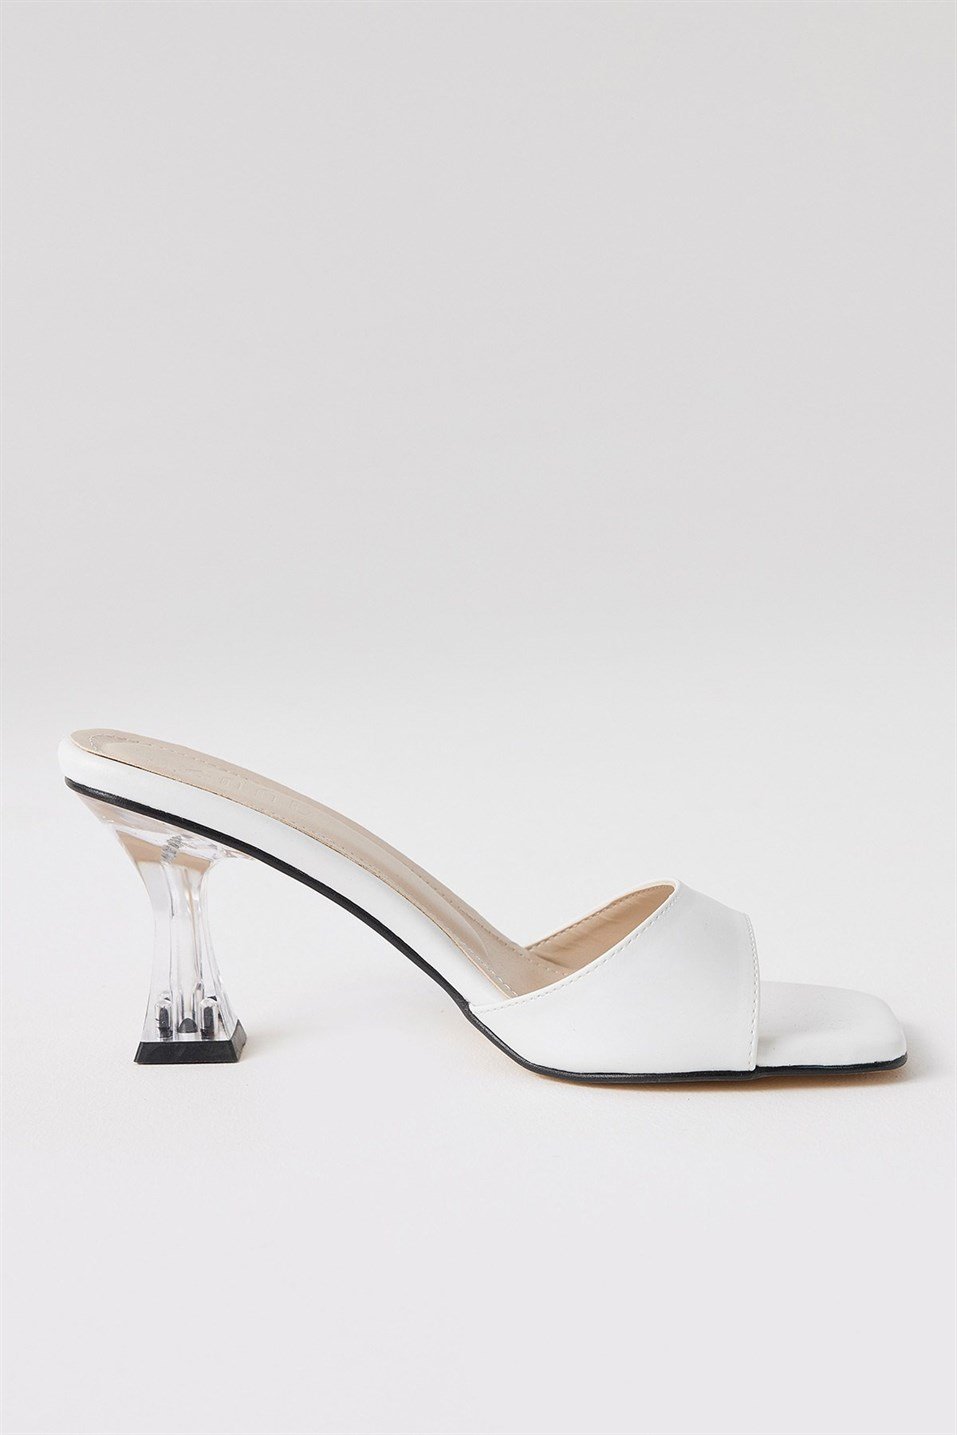 White Oval Banded Heels Sandals